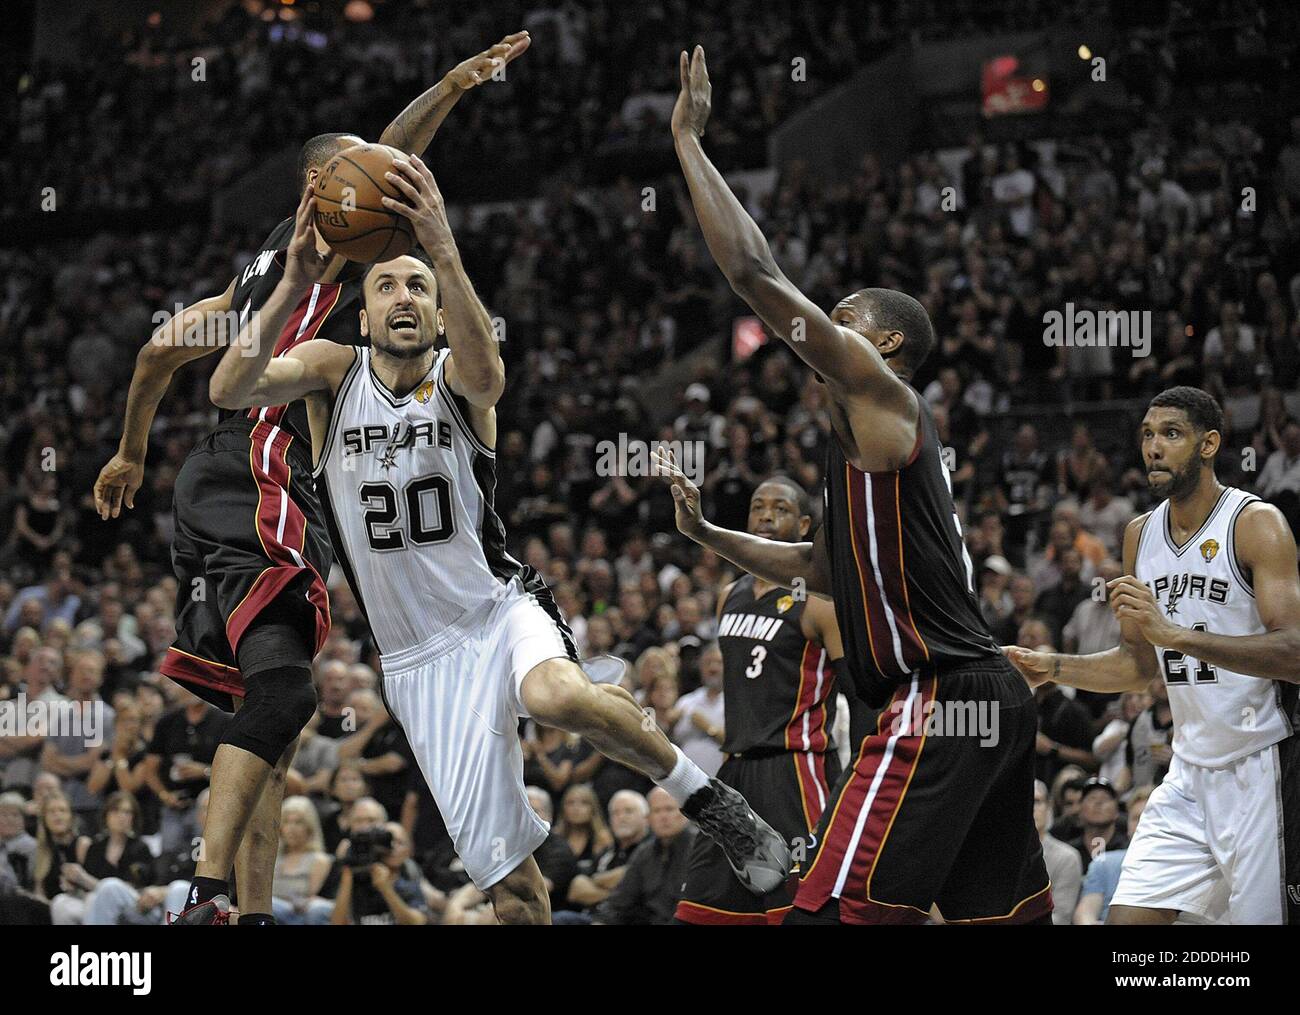 NO FILM, NO VIDEO, NO TV, NO DOCUMENTARY - San Antonio Spurs guard Manu Ginobili drives past Miami Heat's Rashard Lewis and Chris Bosh during the first half in Game 5 of the NBA Finals at the AT&T Center in San Antonio, TX, USA, on Sunday, June 15, 2014. Photo by Michael Laughlin/Sun Sentinel/MCT/ABACAPRESS.COM Stock Photo